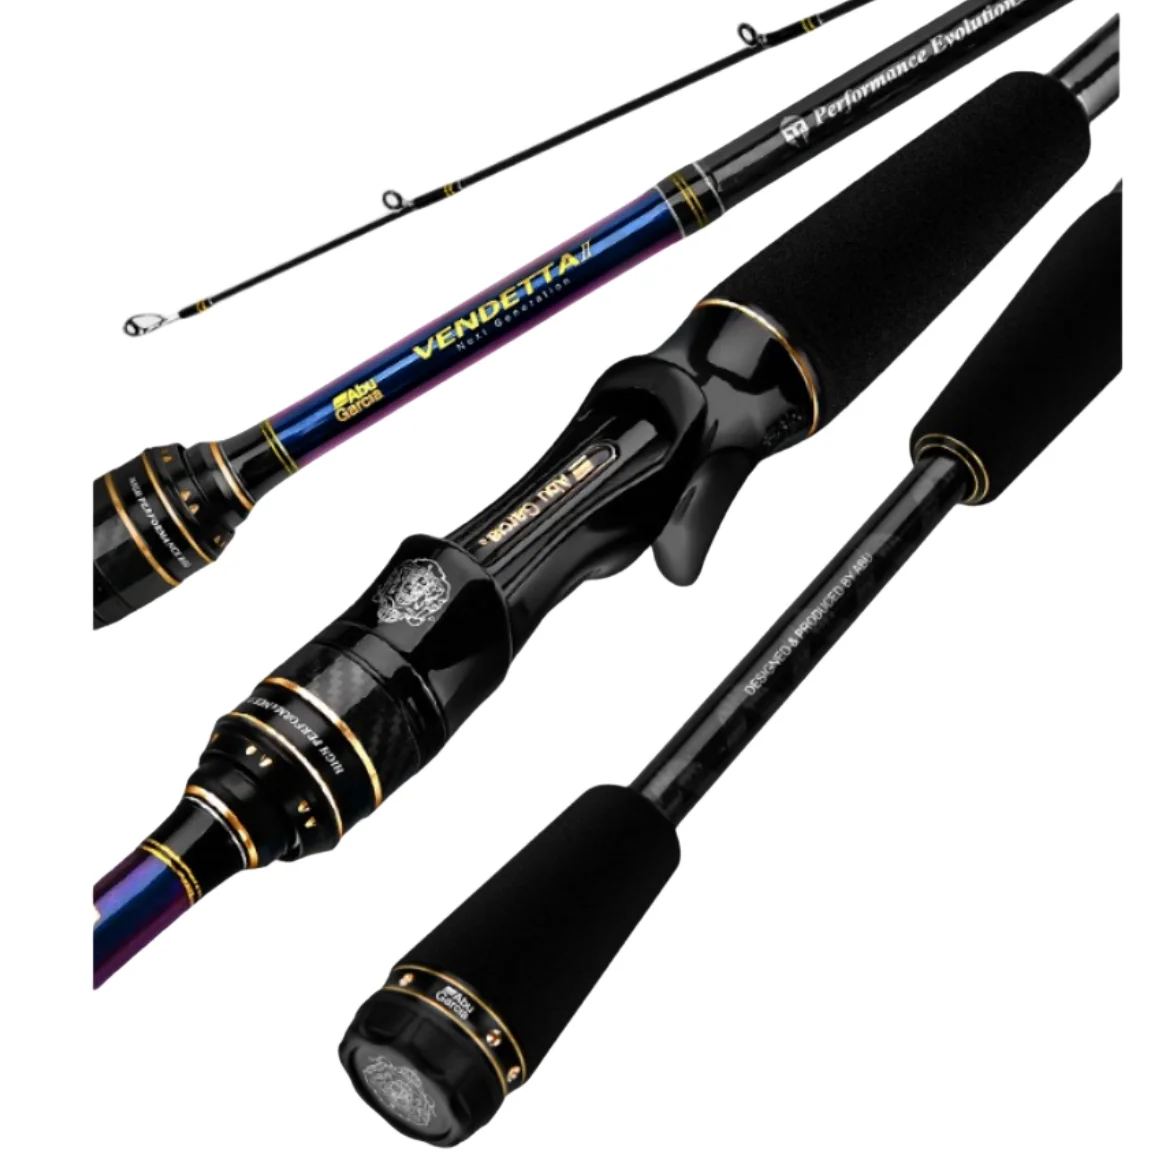 

Lure Rod Distance Throwing Rod Fuji Guide Ring Carbon Ultra Light Ultra Hard Casting Spinning Universal Across All Water Bodies